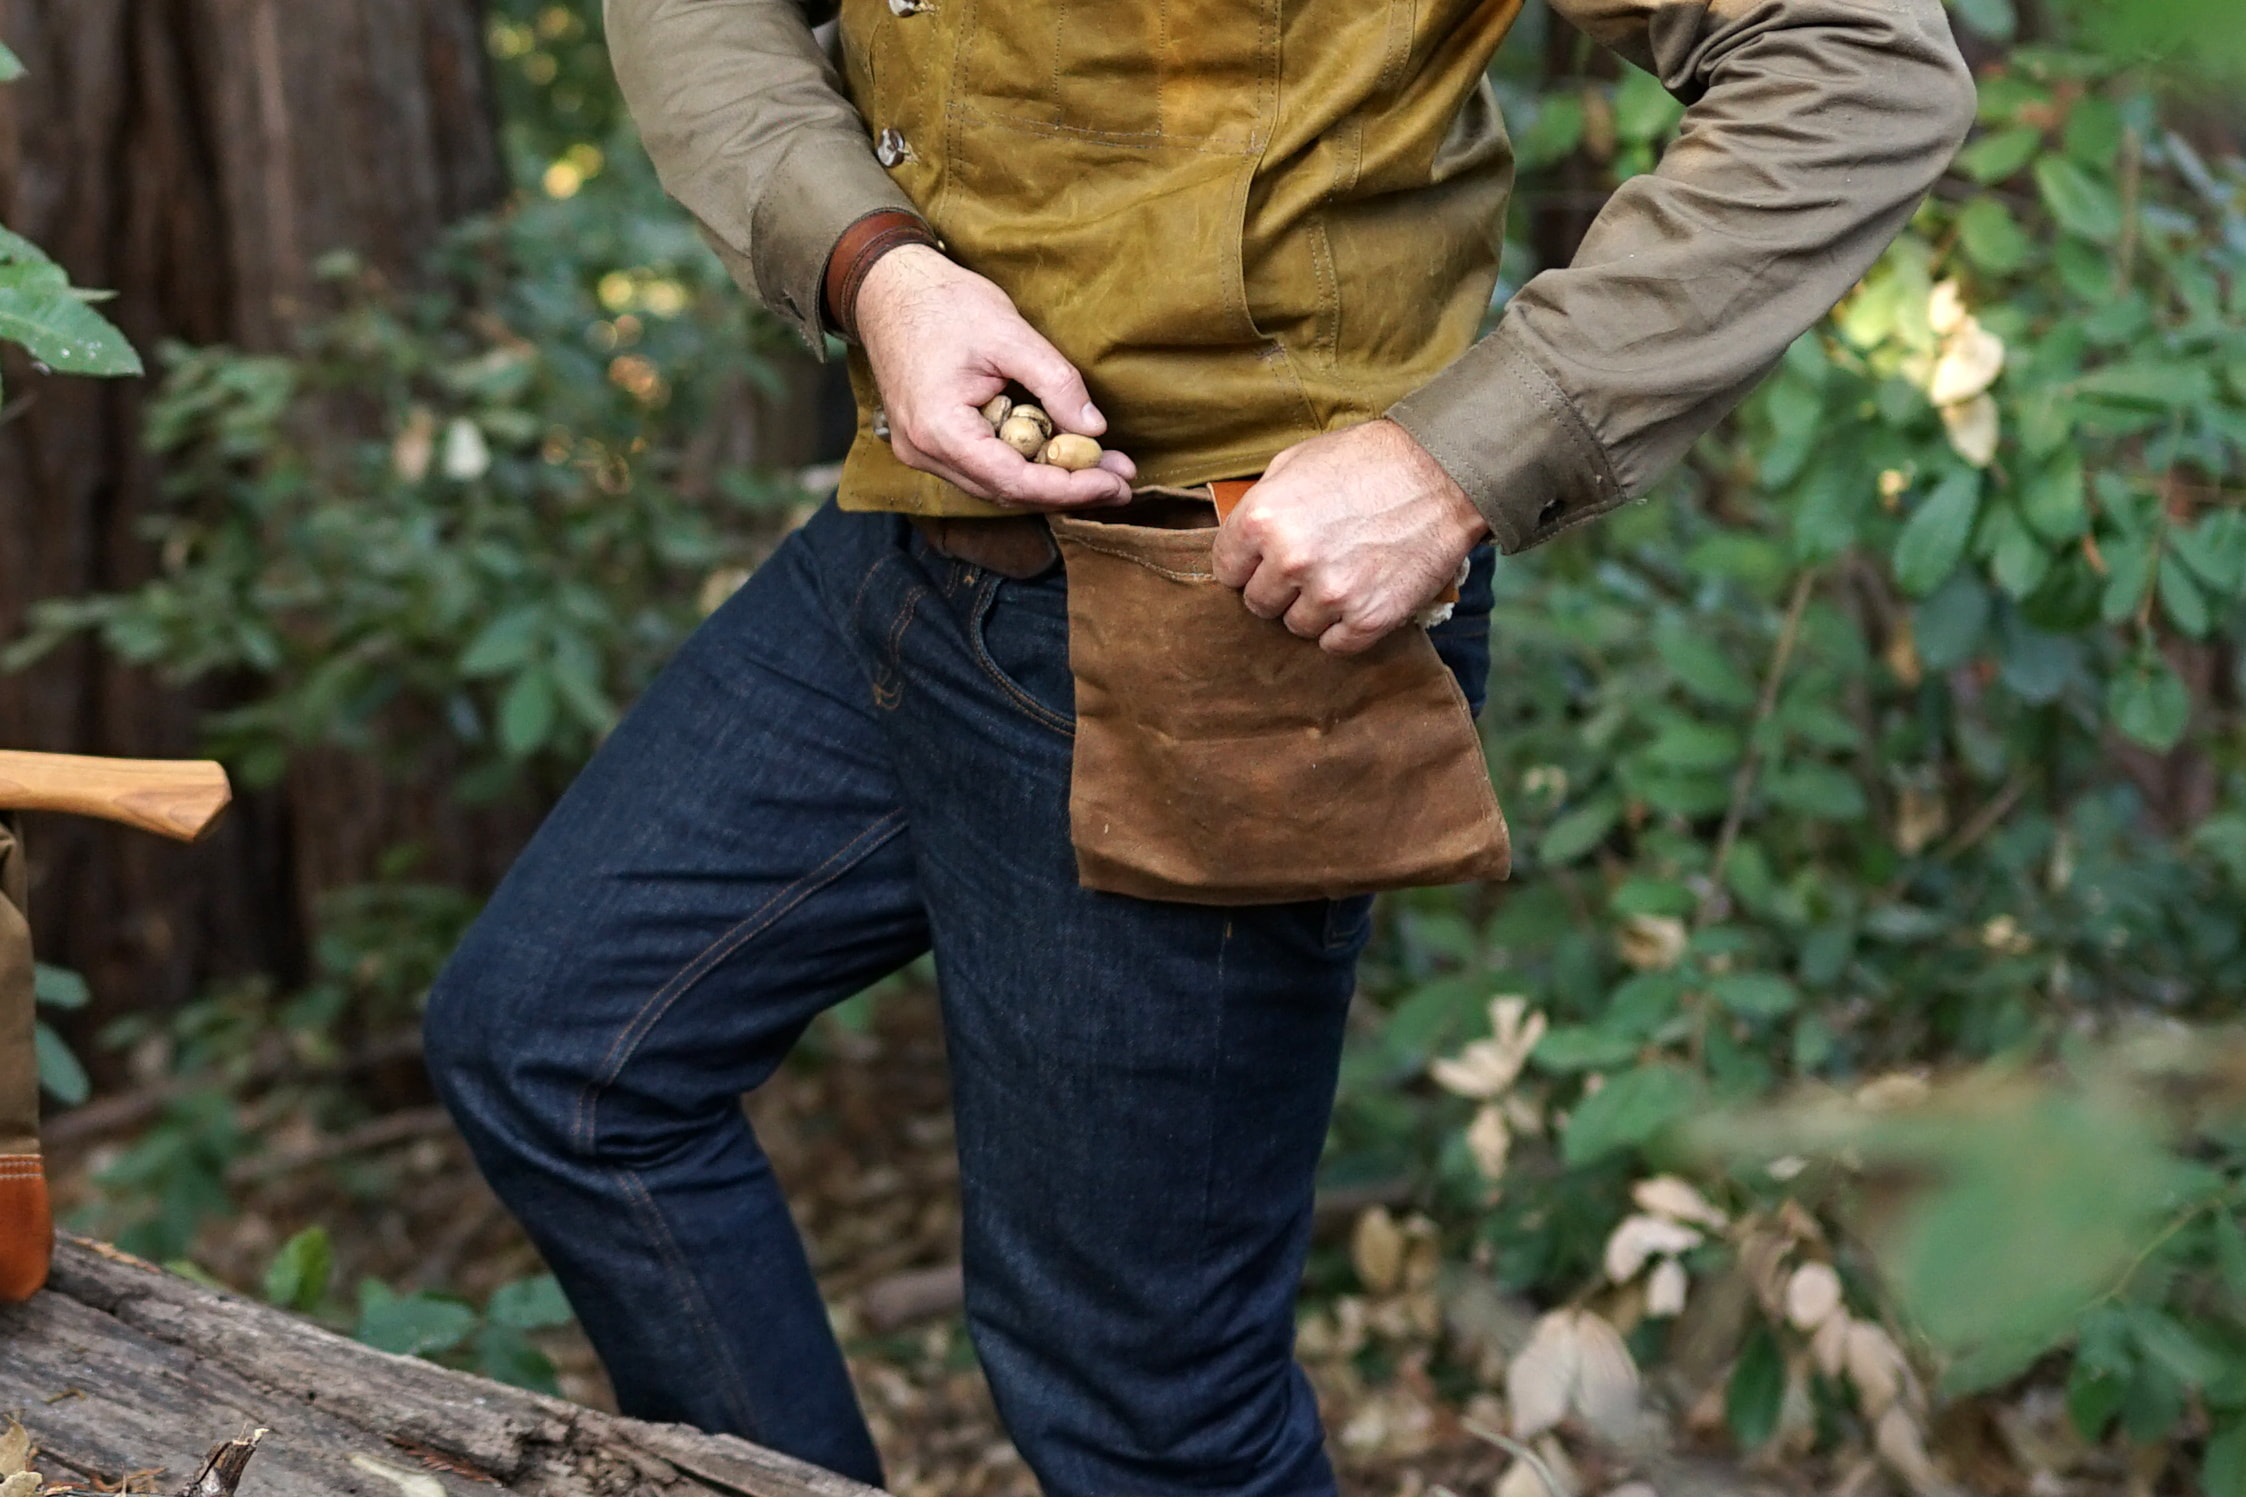 Waterproof your tin cloth and leather coats with Filson's Oil Finish Wax